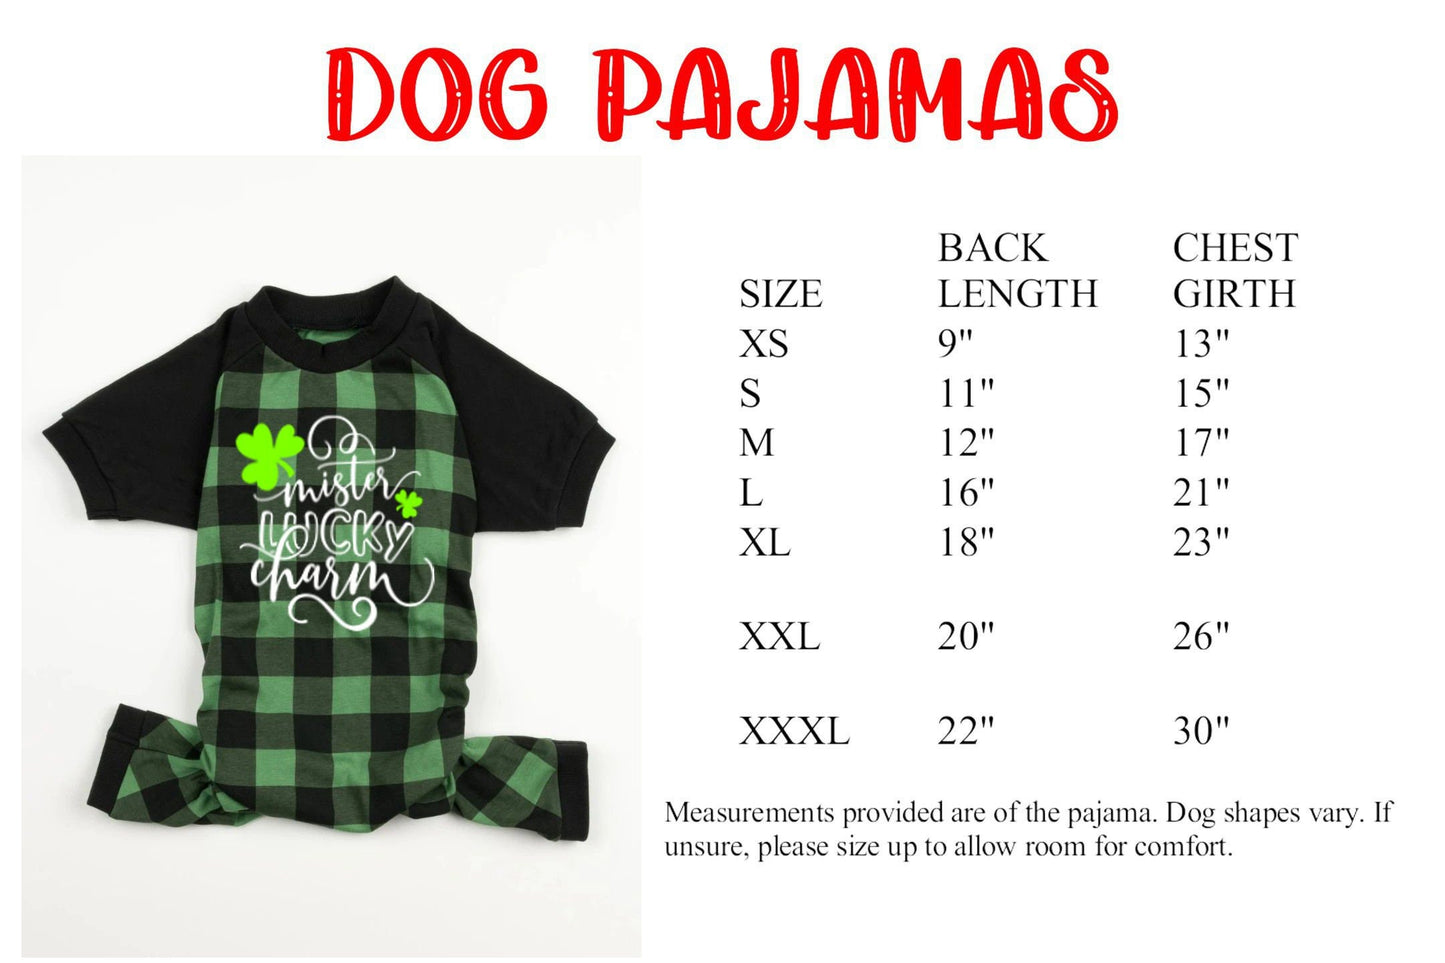 Miss or Mister Lucky Charm Green Plaid St Patrick's Day Pajamas - Kids, Adults and Dog Sizes, toddler st patty's pjs - men's st patty's pjs